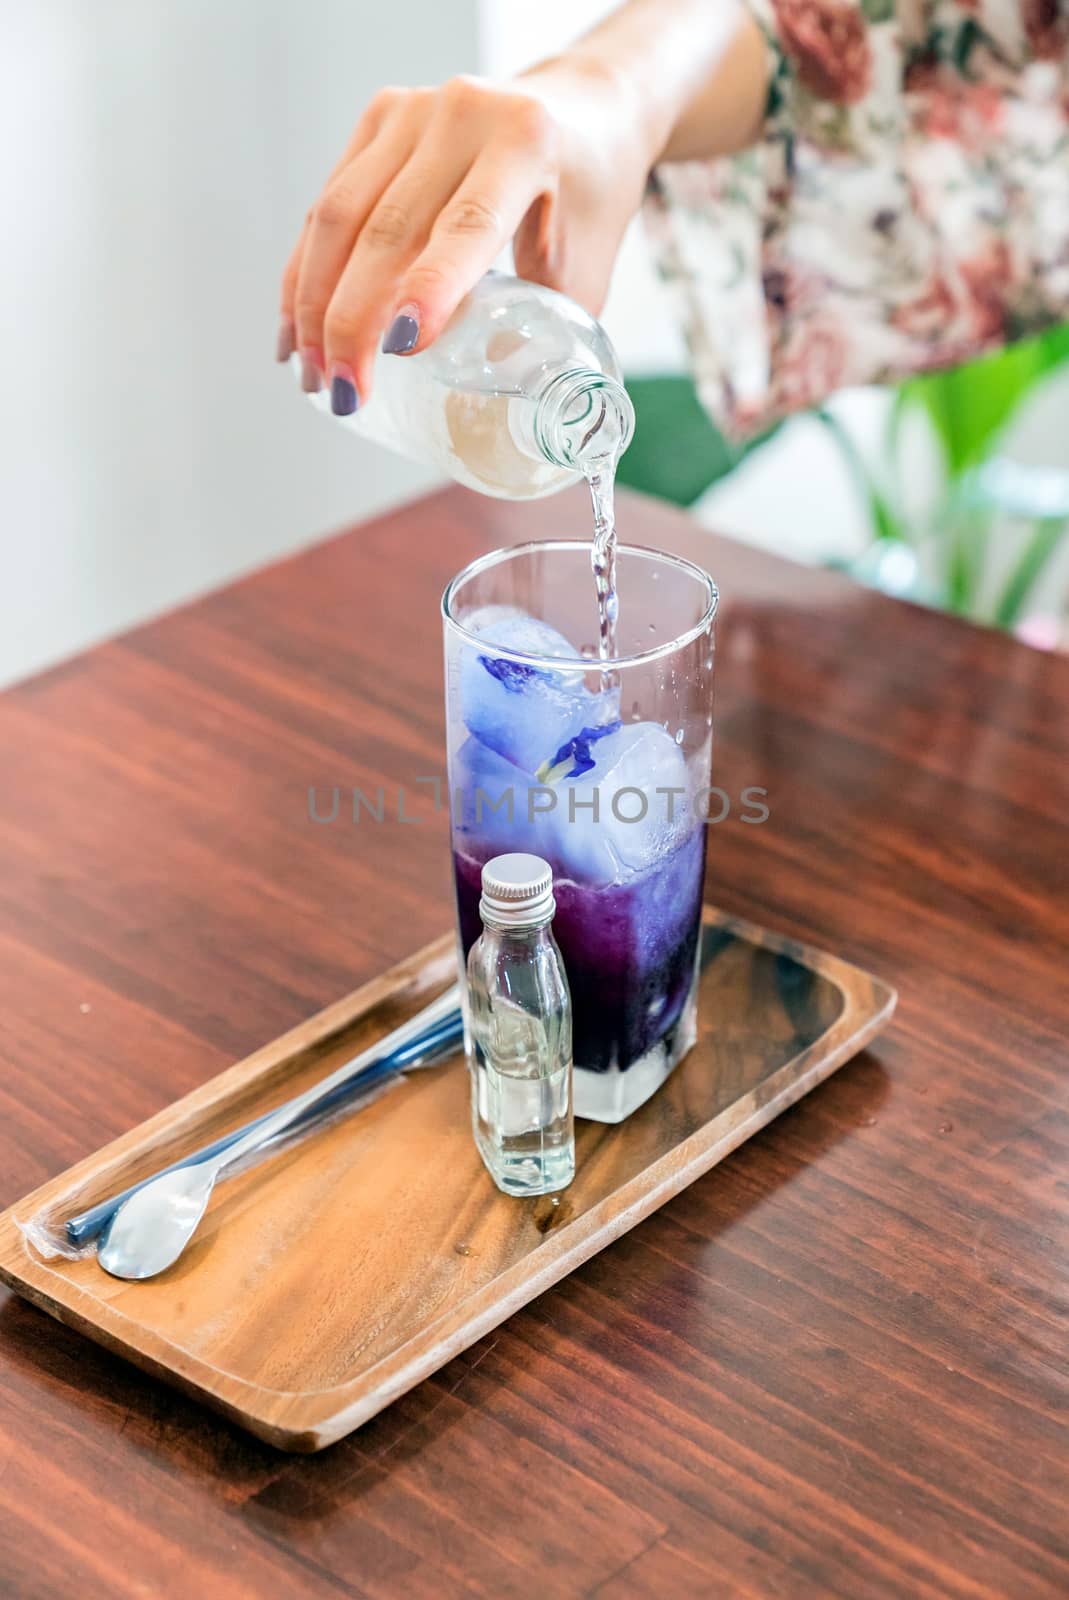 Butterfly pea ice cube by vichie81